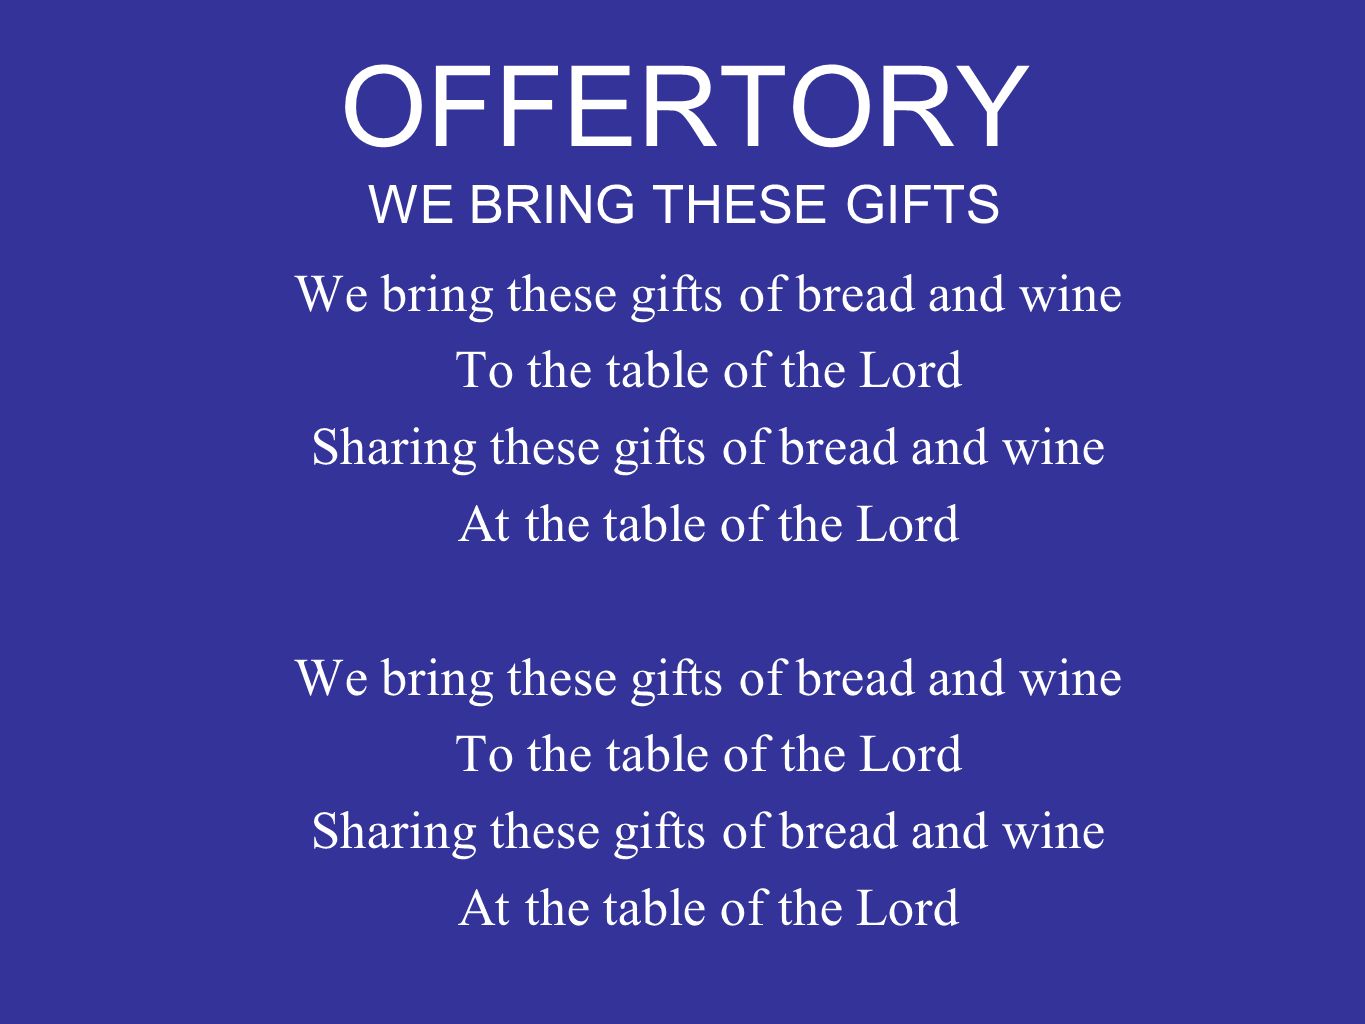 OFFERTORY WE BRING THESE GIFTS We bring these gifts of bread and wine To the table of the Lord Sharing these gifts of bread and wine At the table of the Lord We bring these gifts of bread and wine To the table of the Lord Sharing these gifts of bread and wine At the table of the Lord